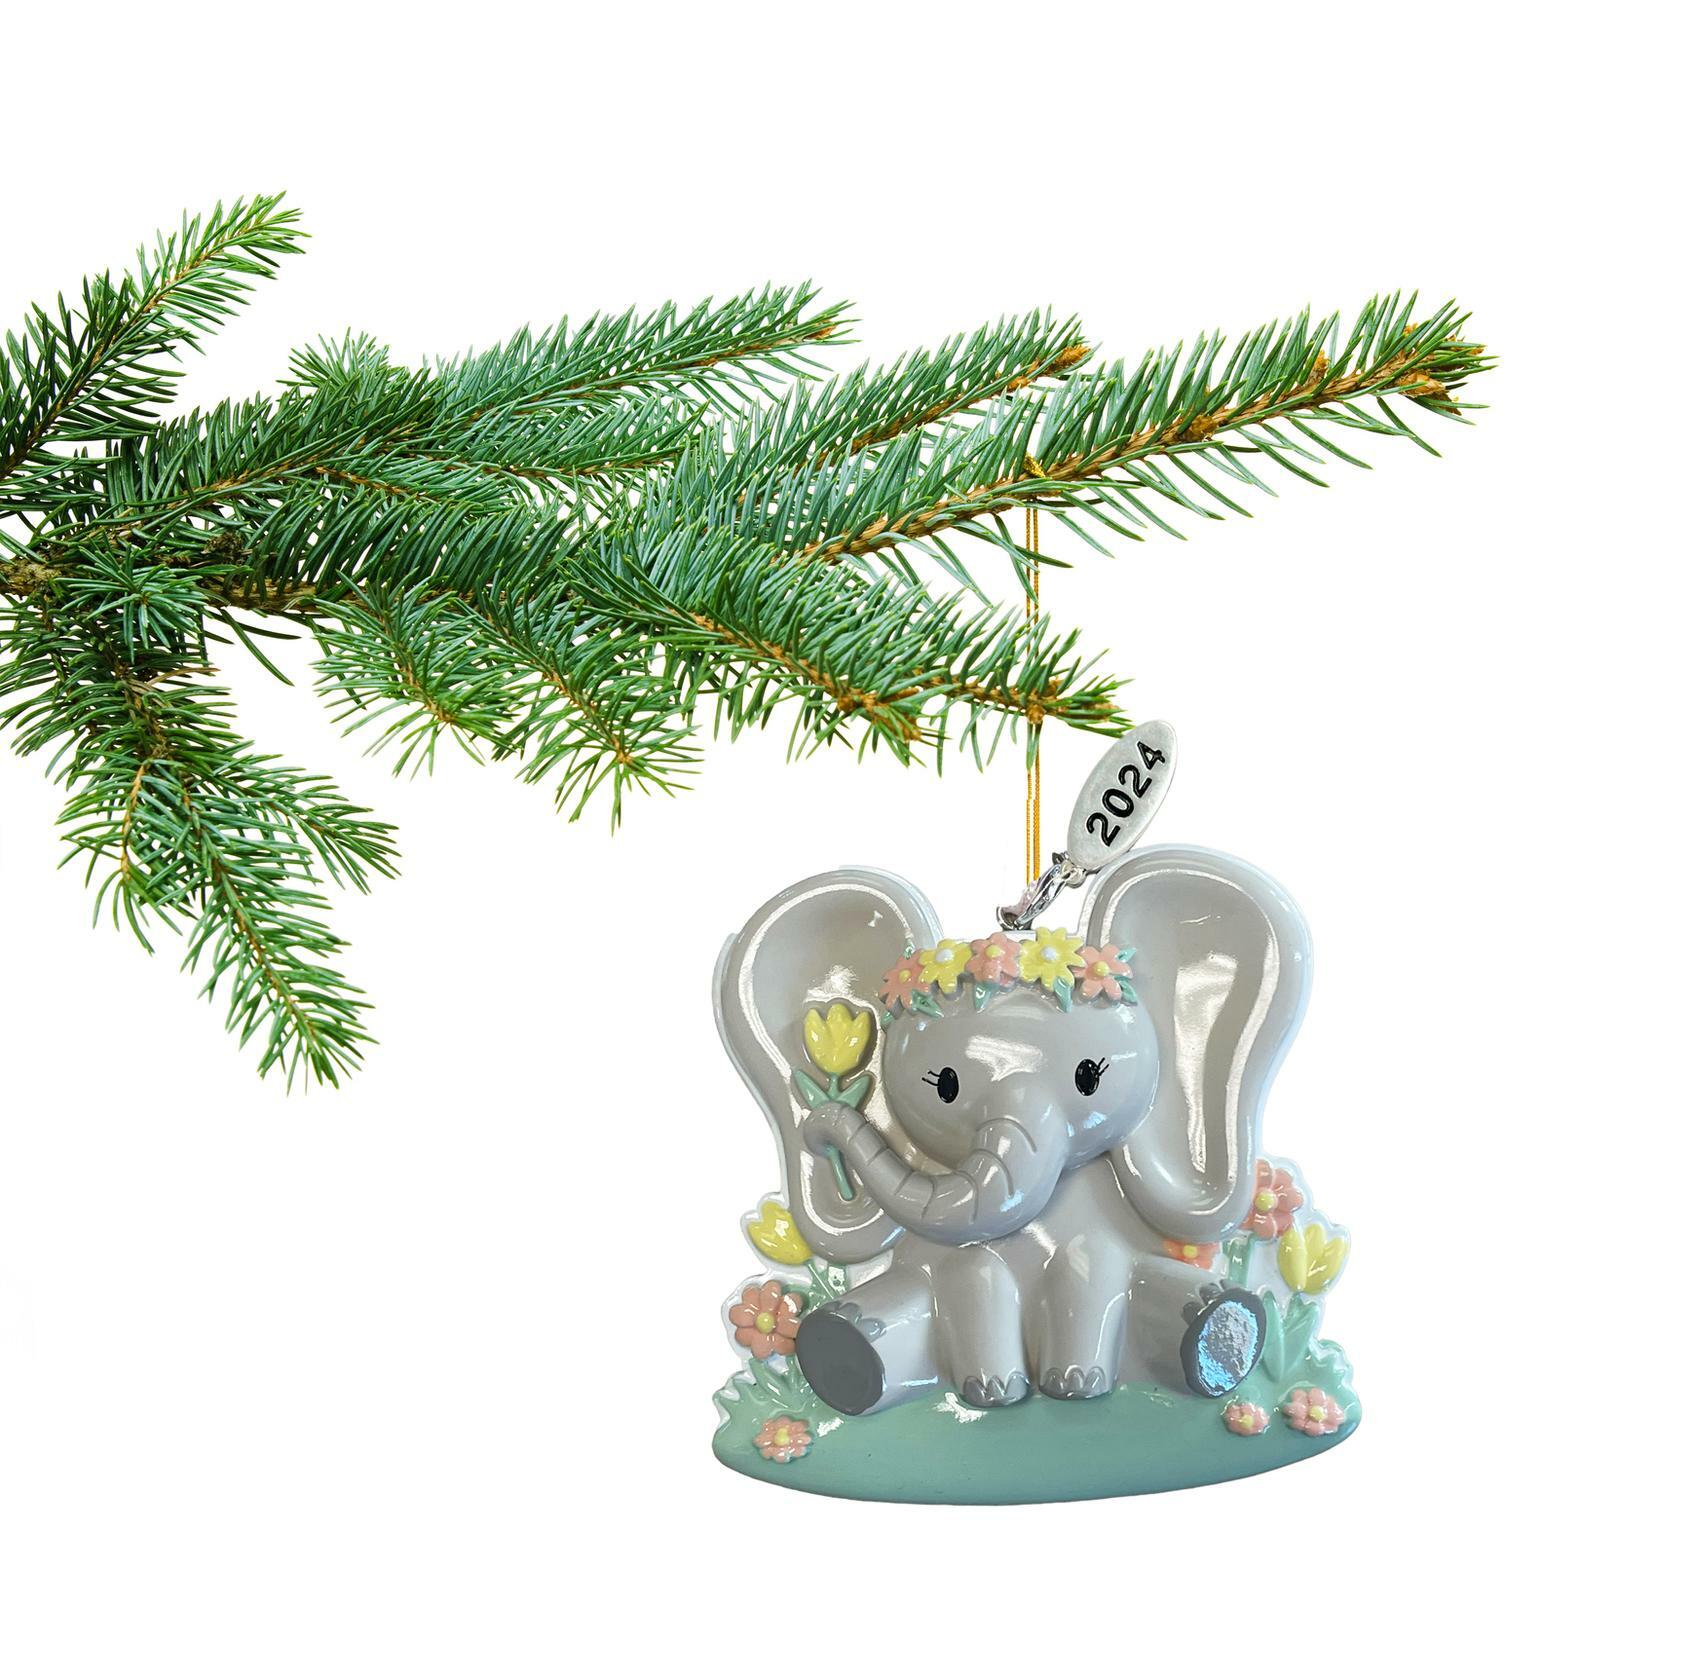 2024 Baby Christmas Ornament, Elephant Baby Girl Christmas Ornament or Happy Birthday Ornament - Can Be Personalized at Home, Comes in a Gift Box